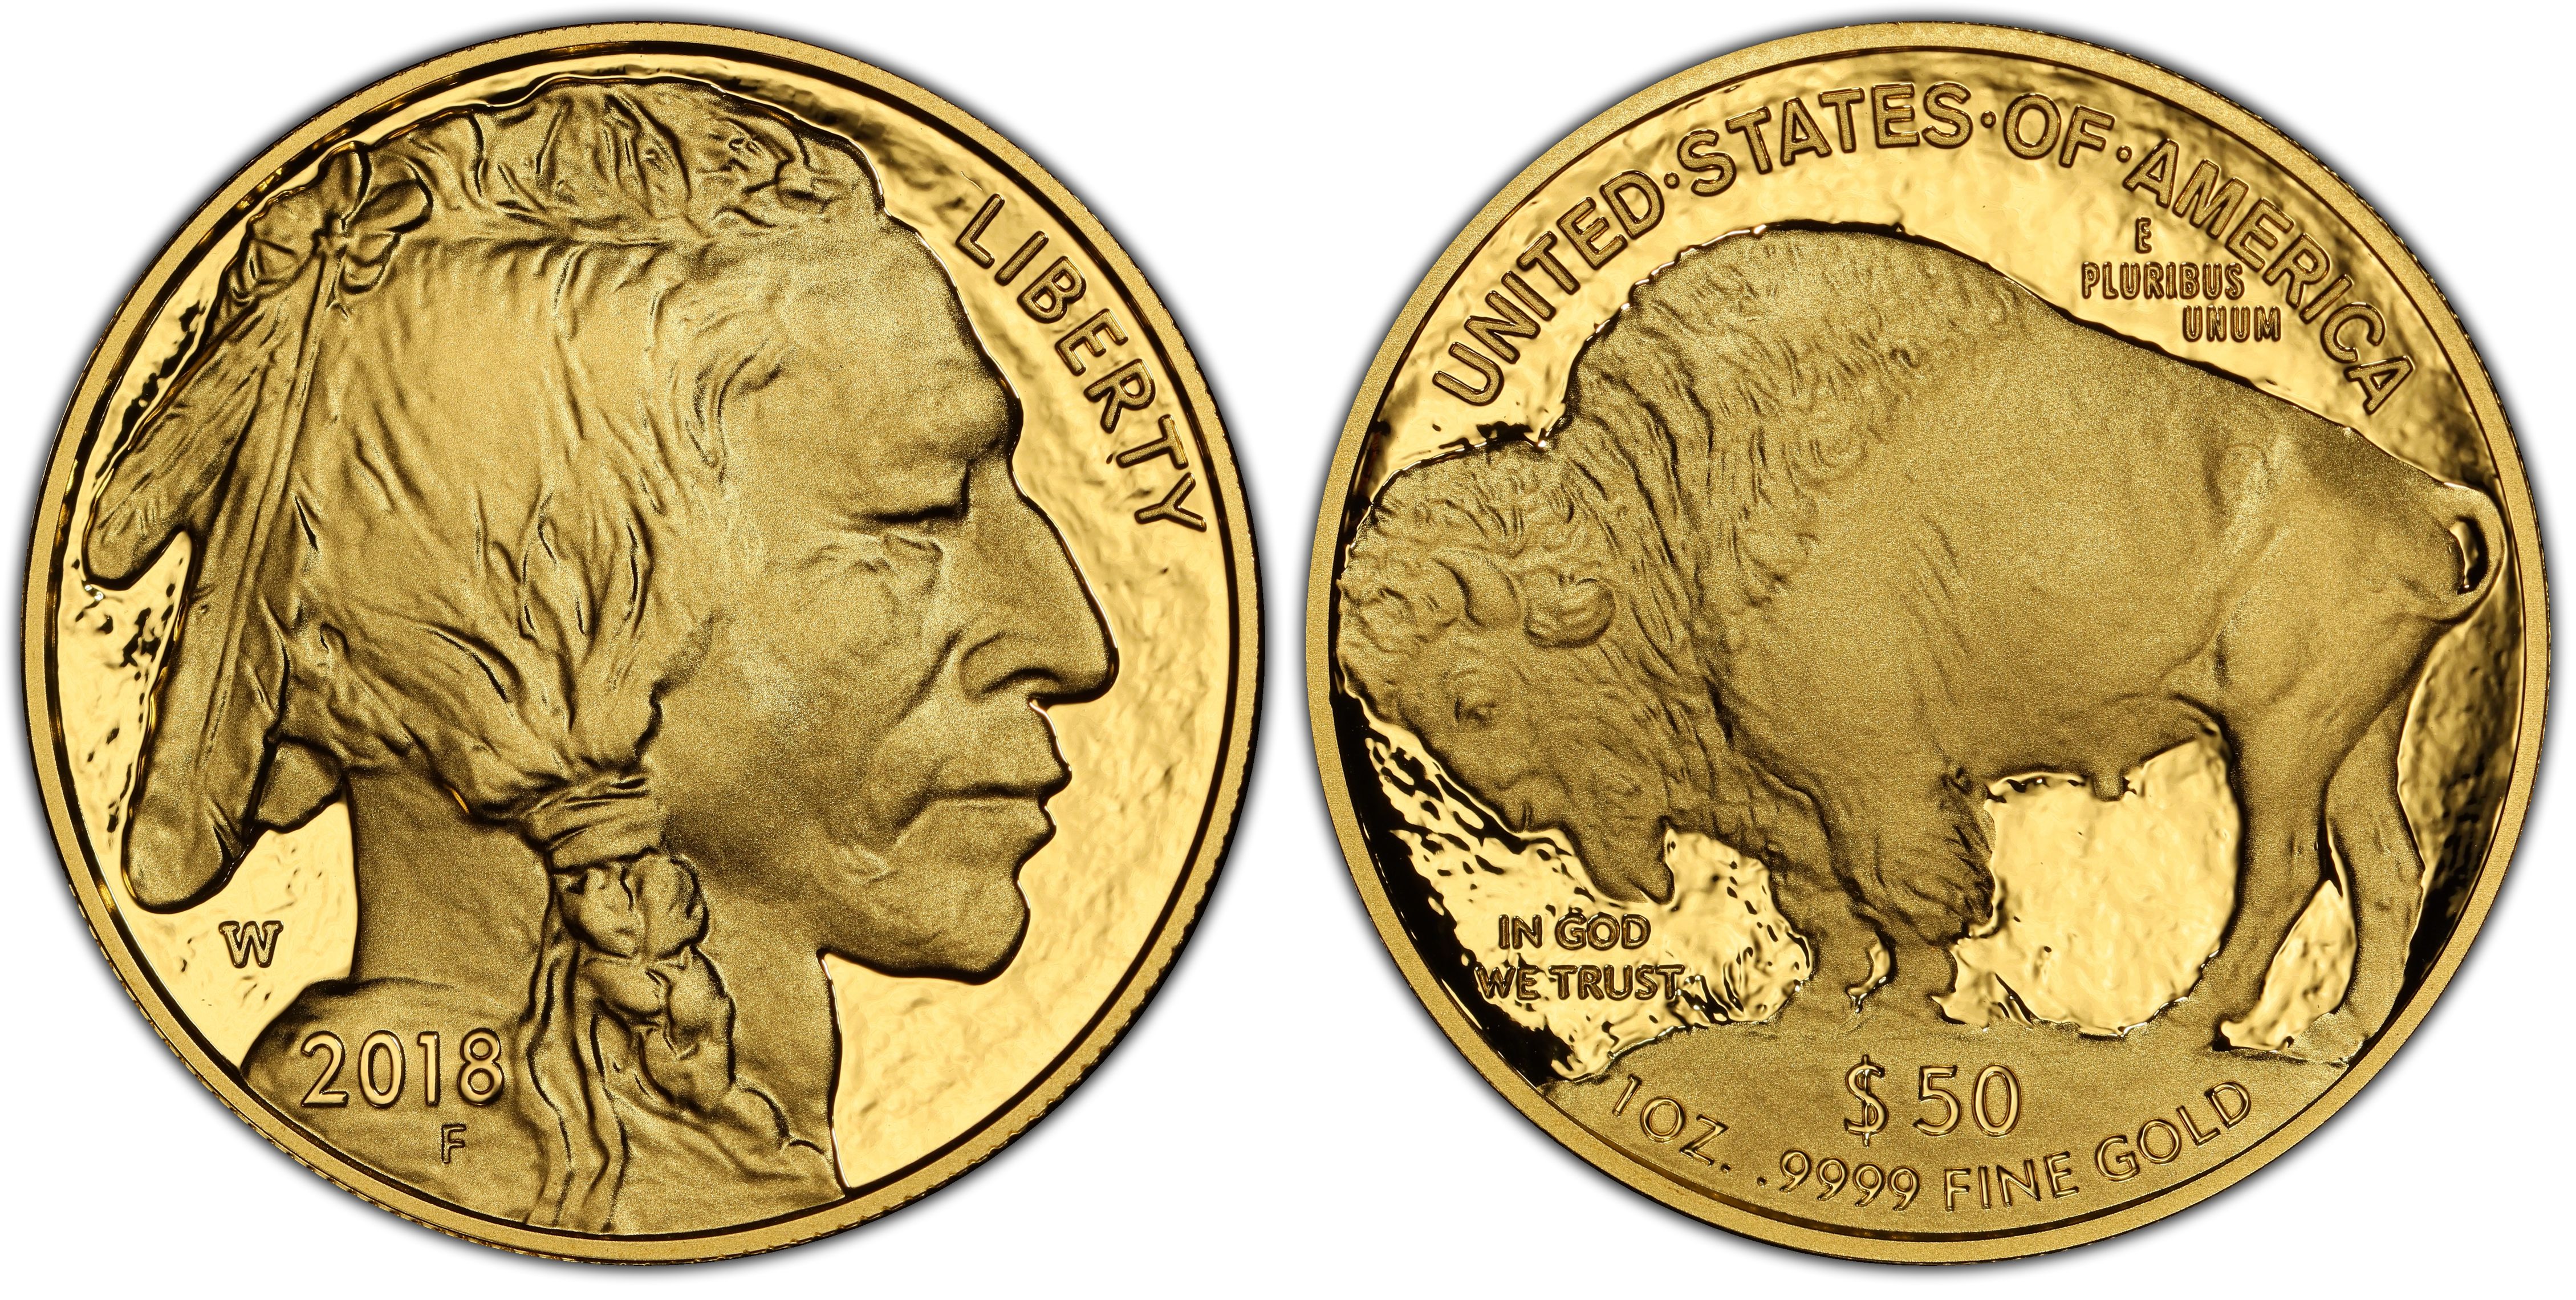 2018-W　Mercanti　[送料無料]　First　$50　PCGS　FDOI　Coin　金貨　Day　Gold　Issue　of　アンティークコイン　PR70DCAM　Buffalo　#gct-wr-011641-458-